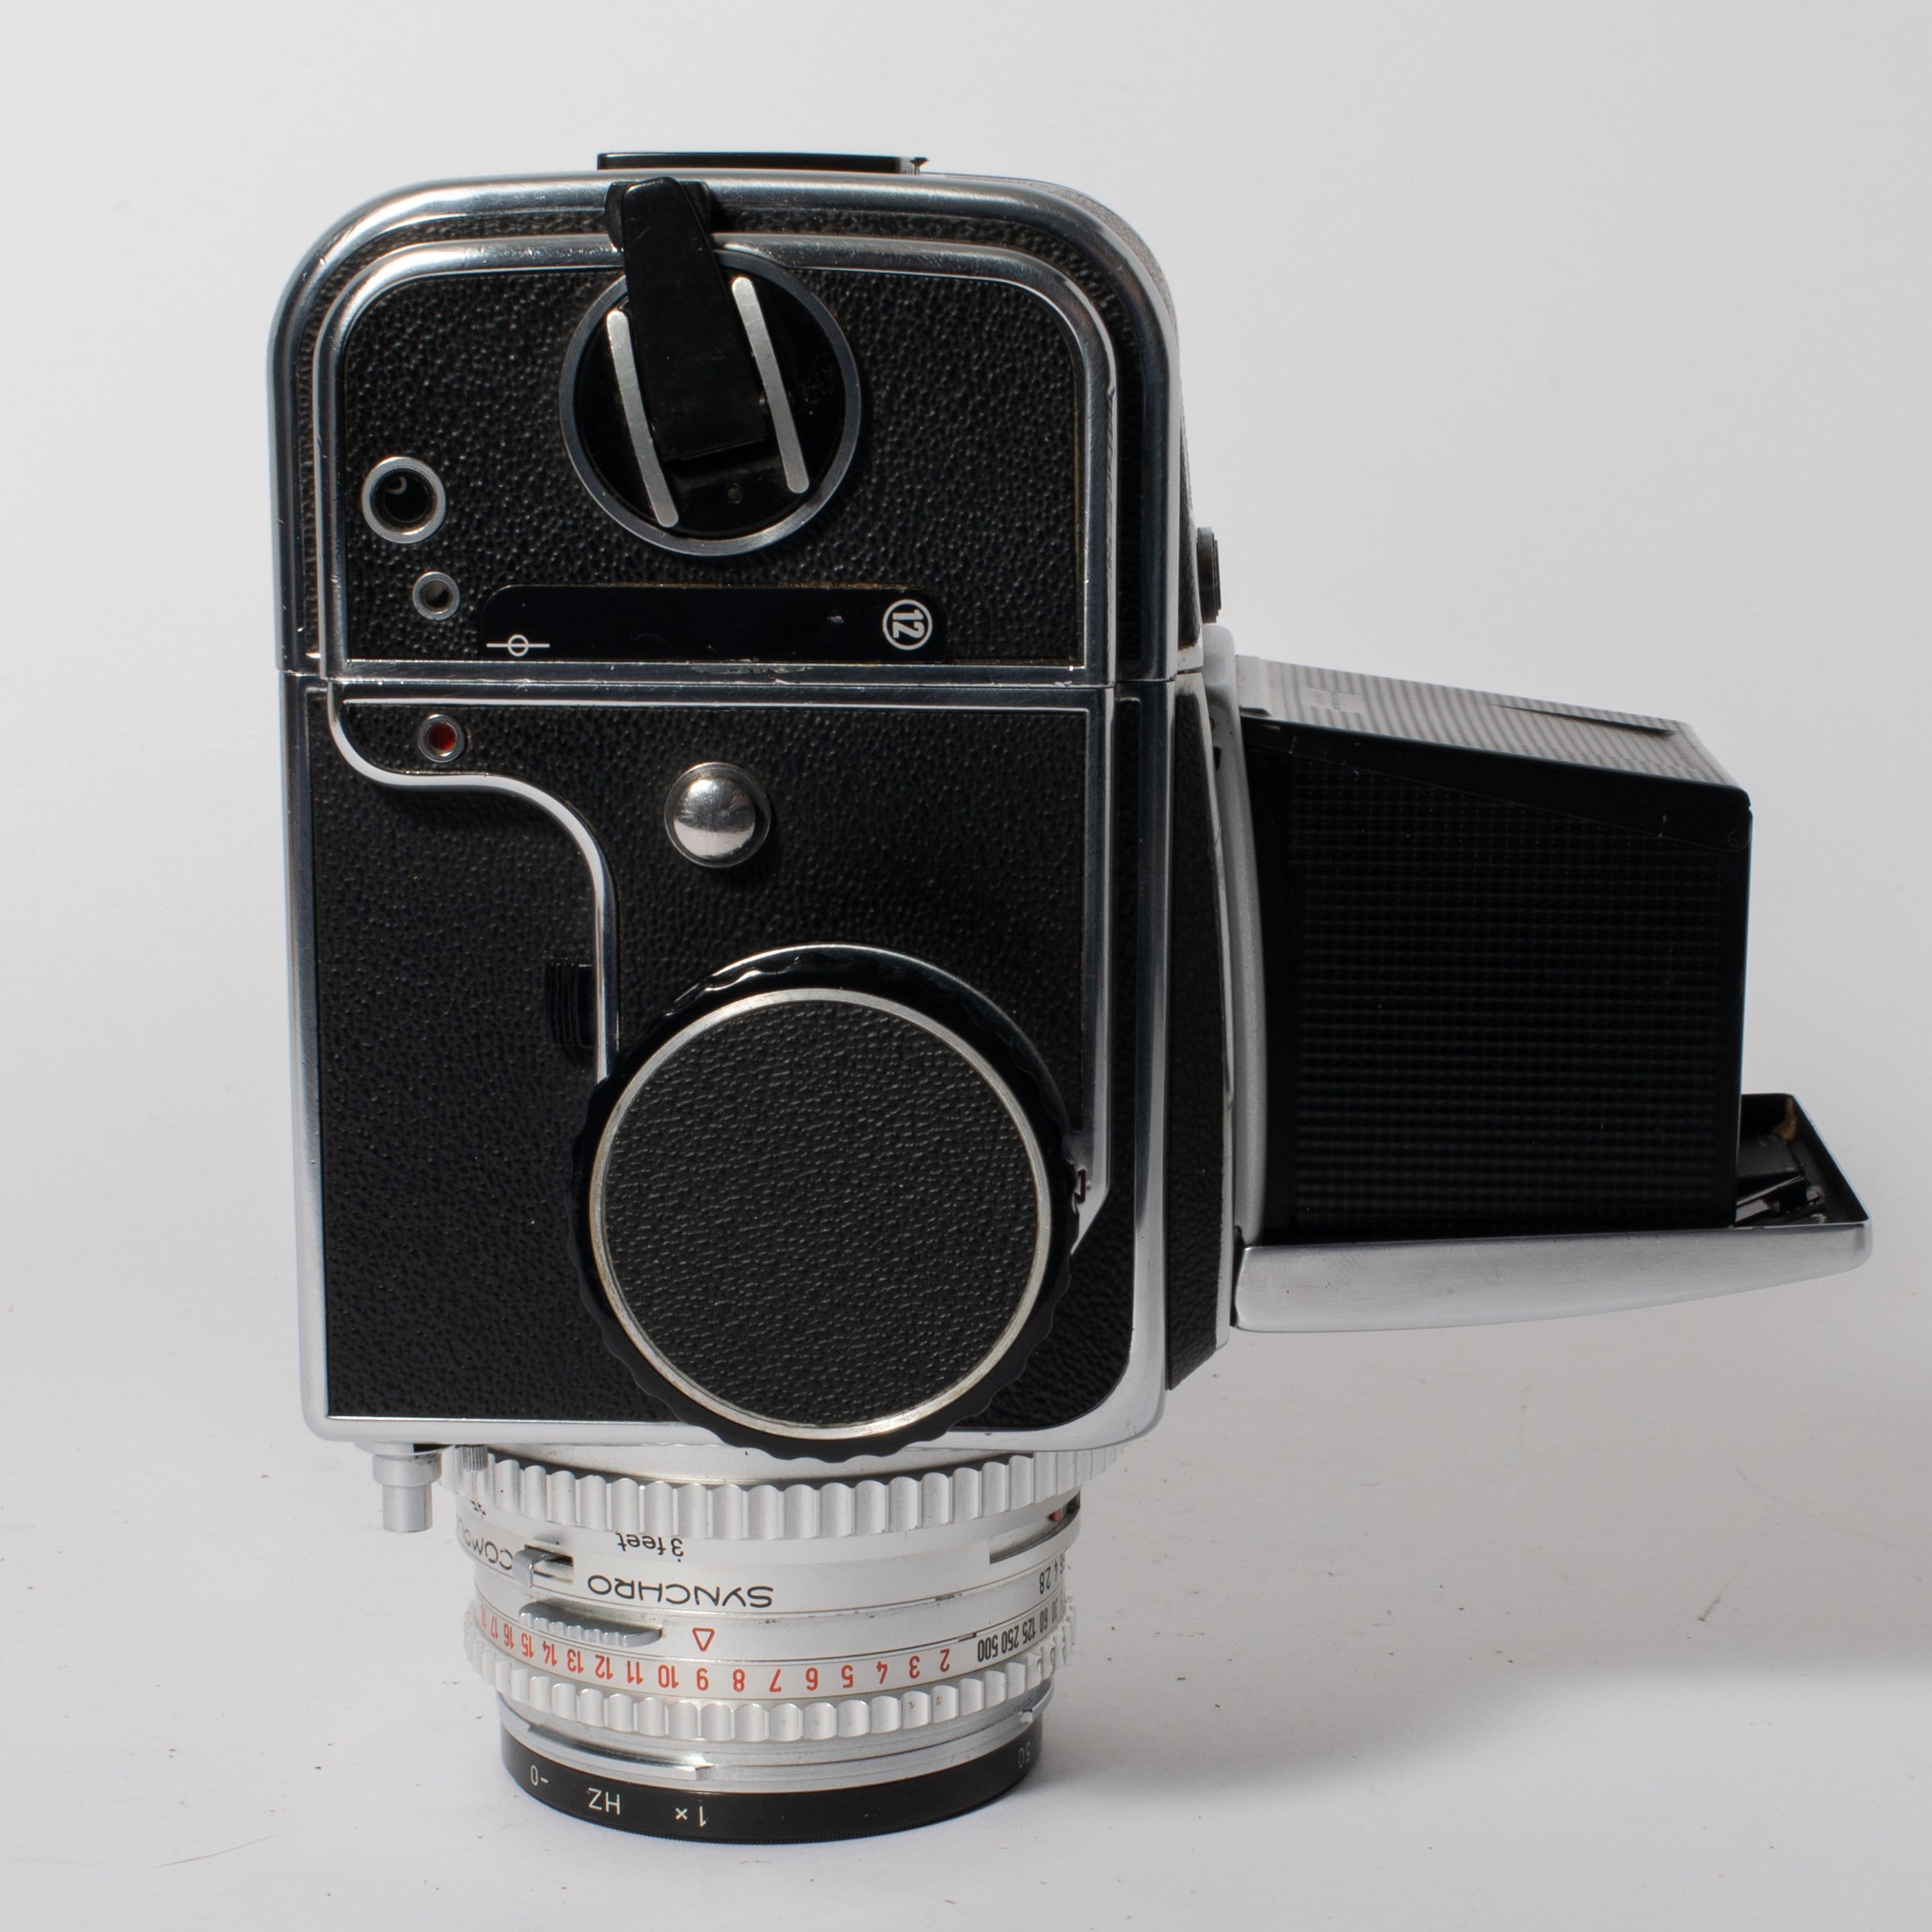 Hasselblad 500 C/M with Zeiss Planar 80mm f/2.8 Lens Kit – Film 